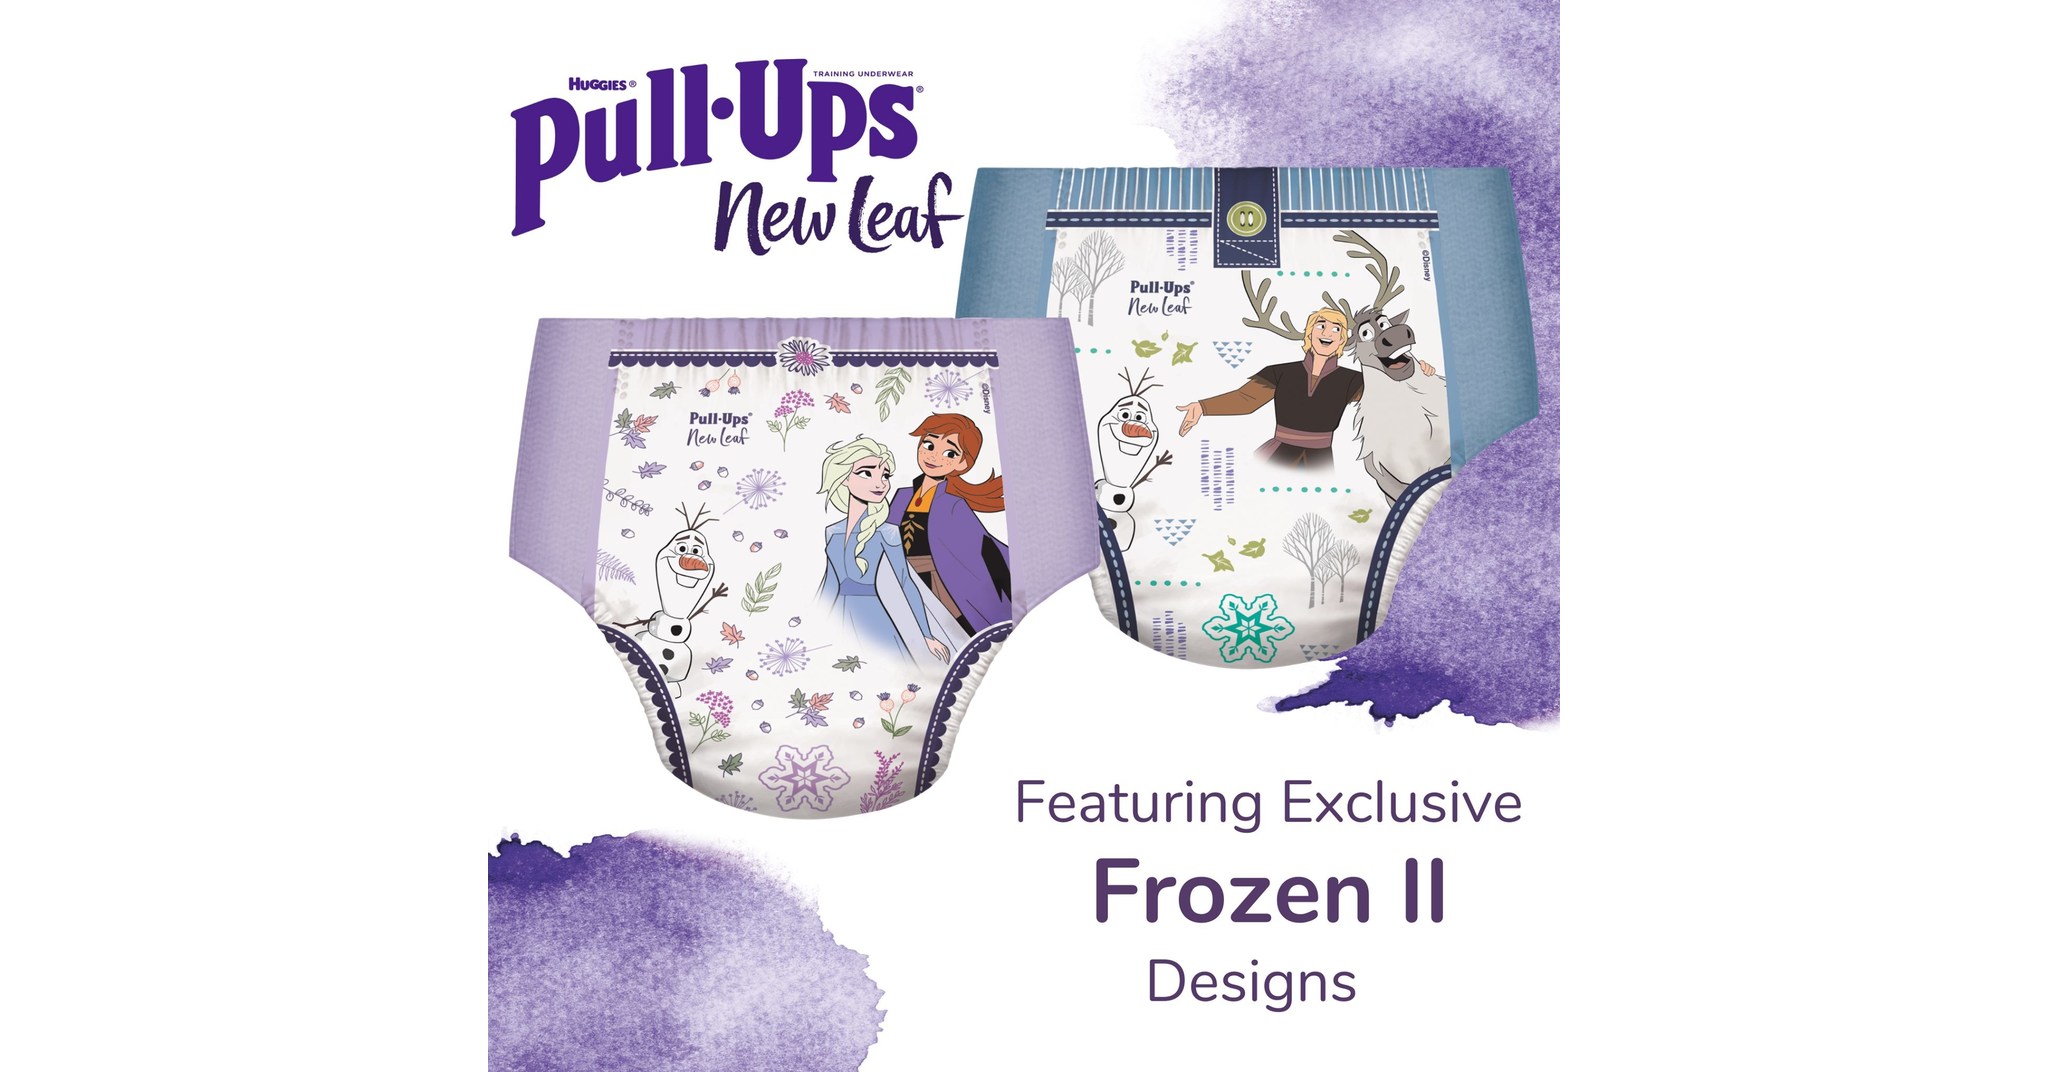 Pull-Ups® - Made with plant-based ingredients (28% by weight